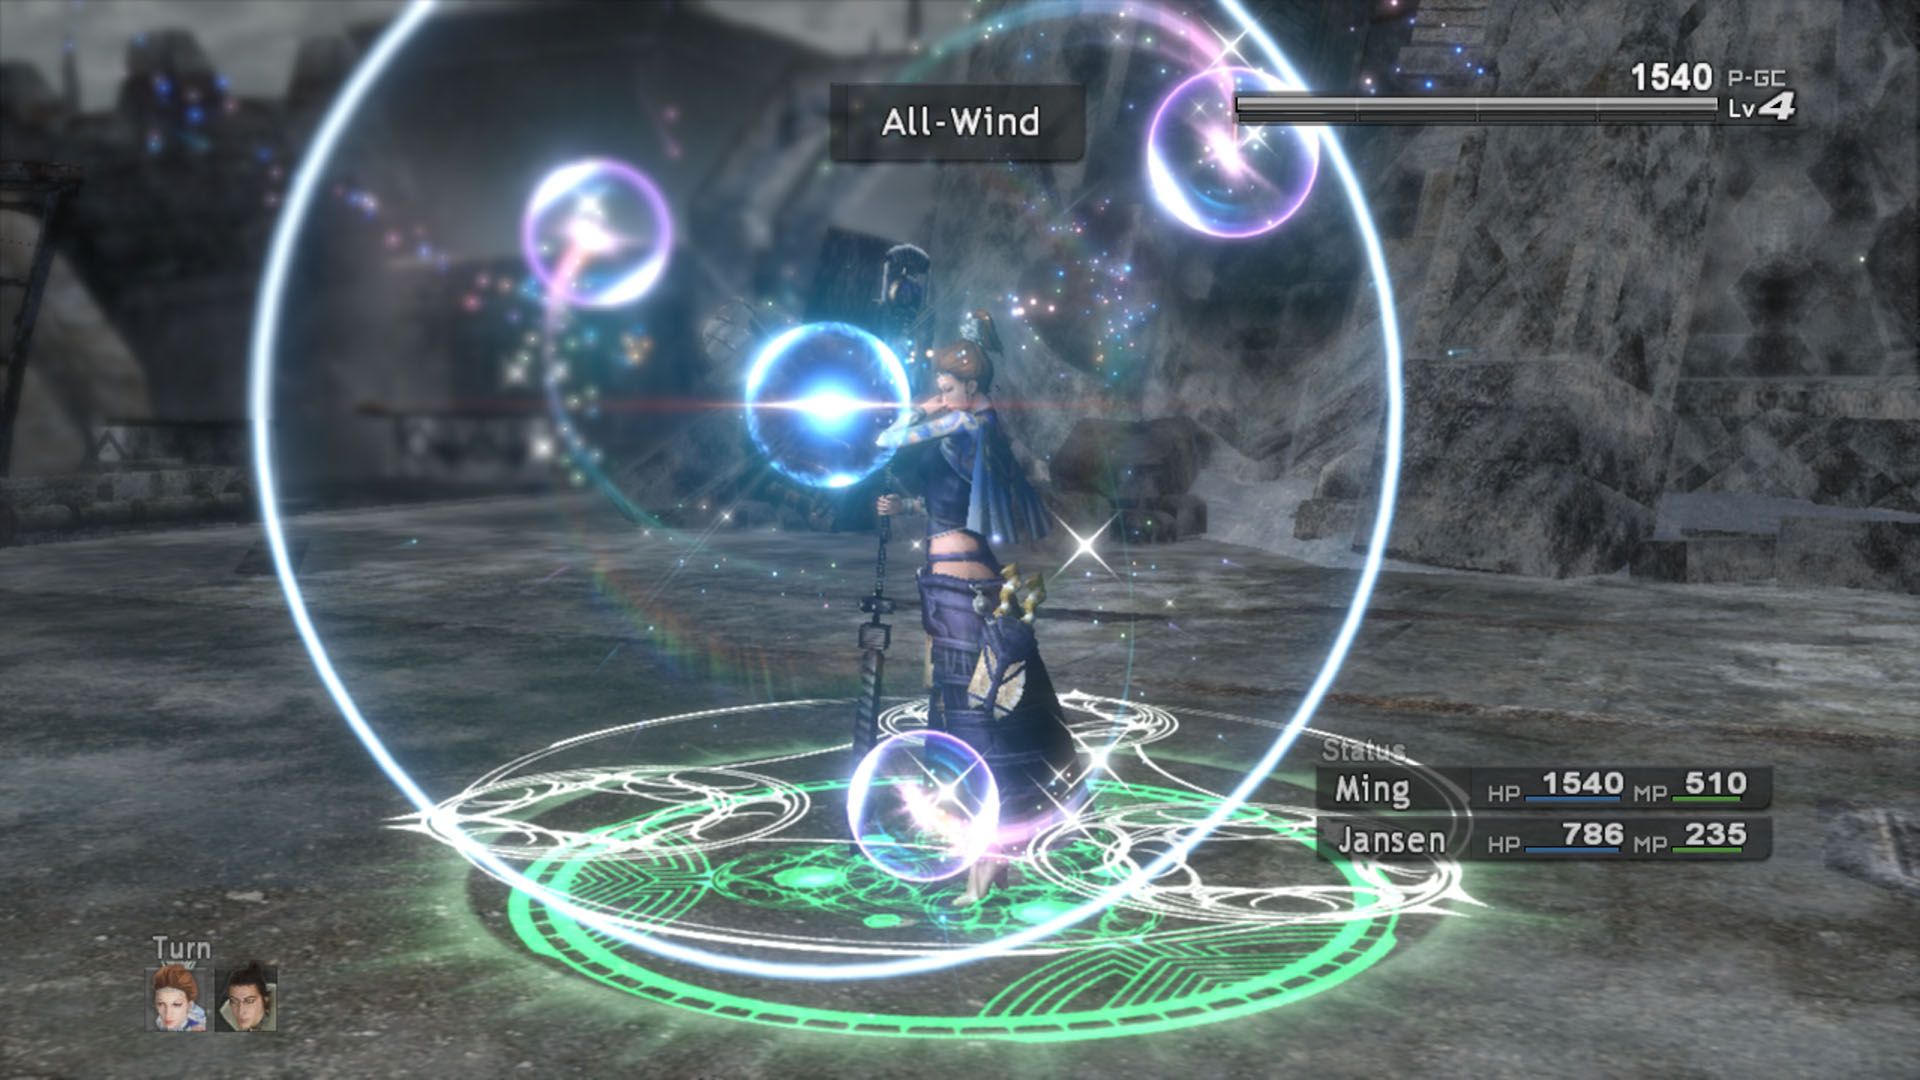 An example of spellcasting in Lost odyssey